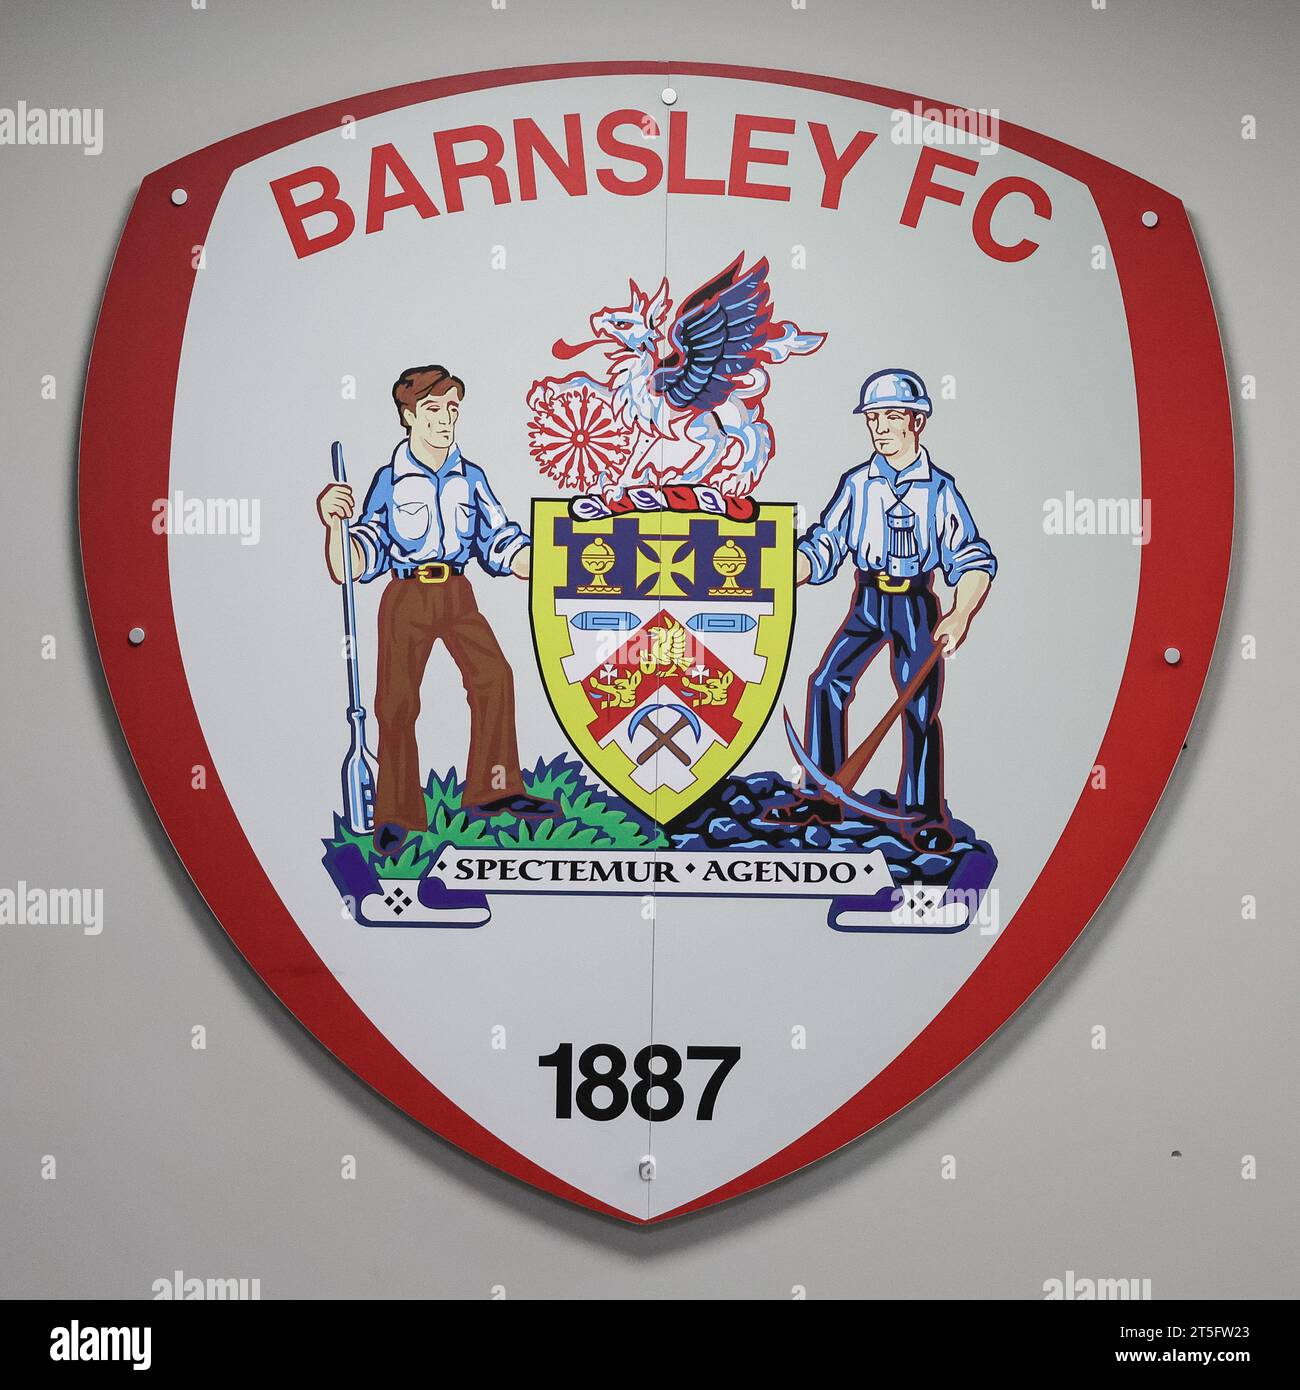 Barnsley FC logo in the tunnel area during the Emirates FA Cup match Barnsley vs Horsham FC at Oakwell, Barnsley, United Kingdom, 3rd November 2023 (Photo by Mark Cosgrove/News Images) Stock Photo